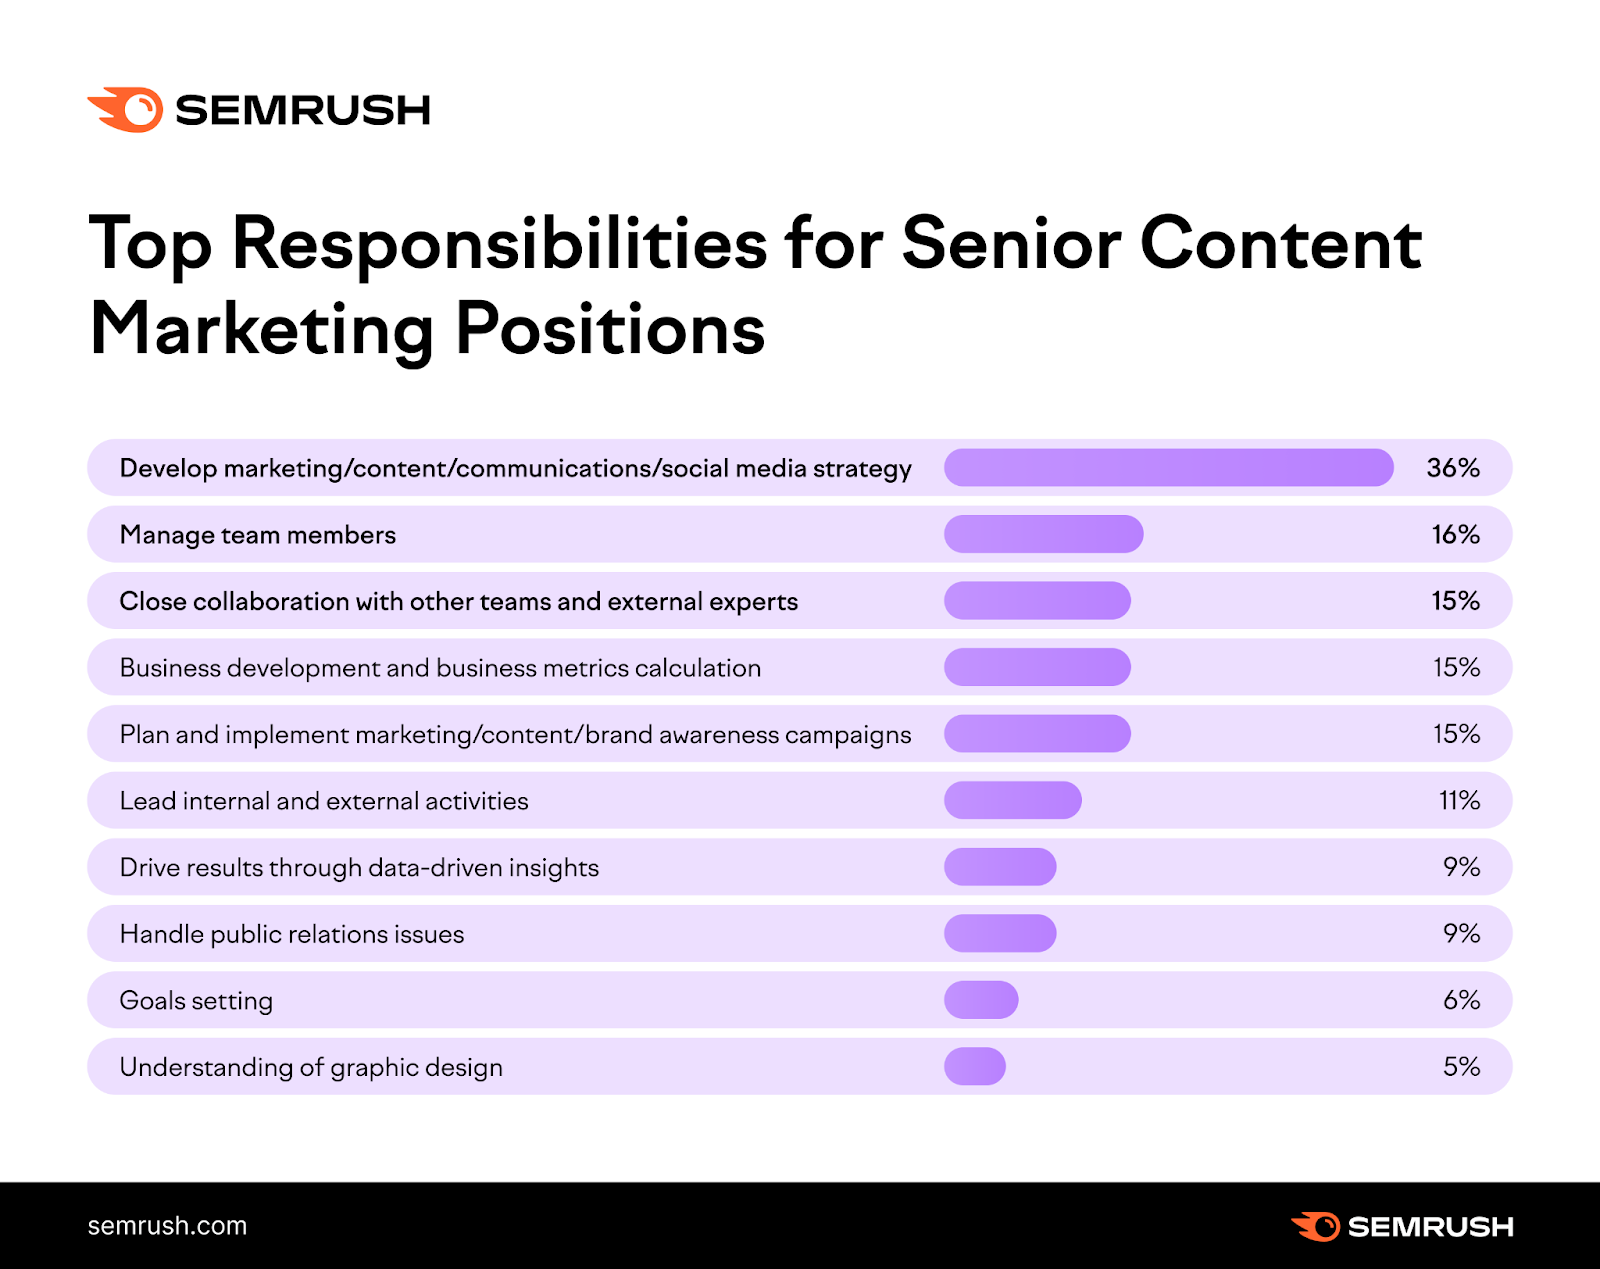 Top responsibilities for senior content marketing positions: content strategy, managing teams, team collaboration, and more